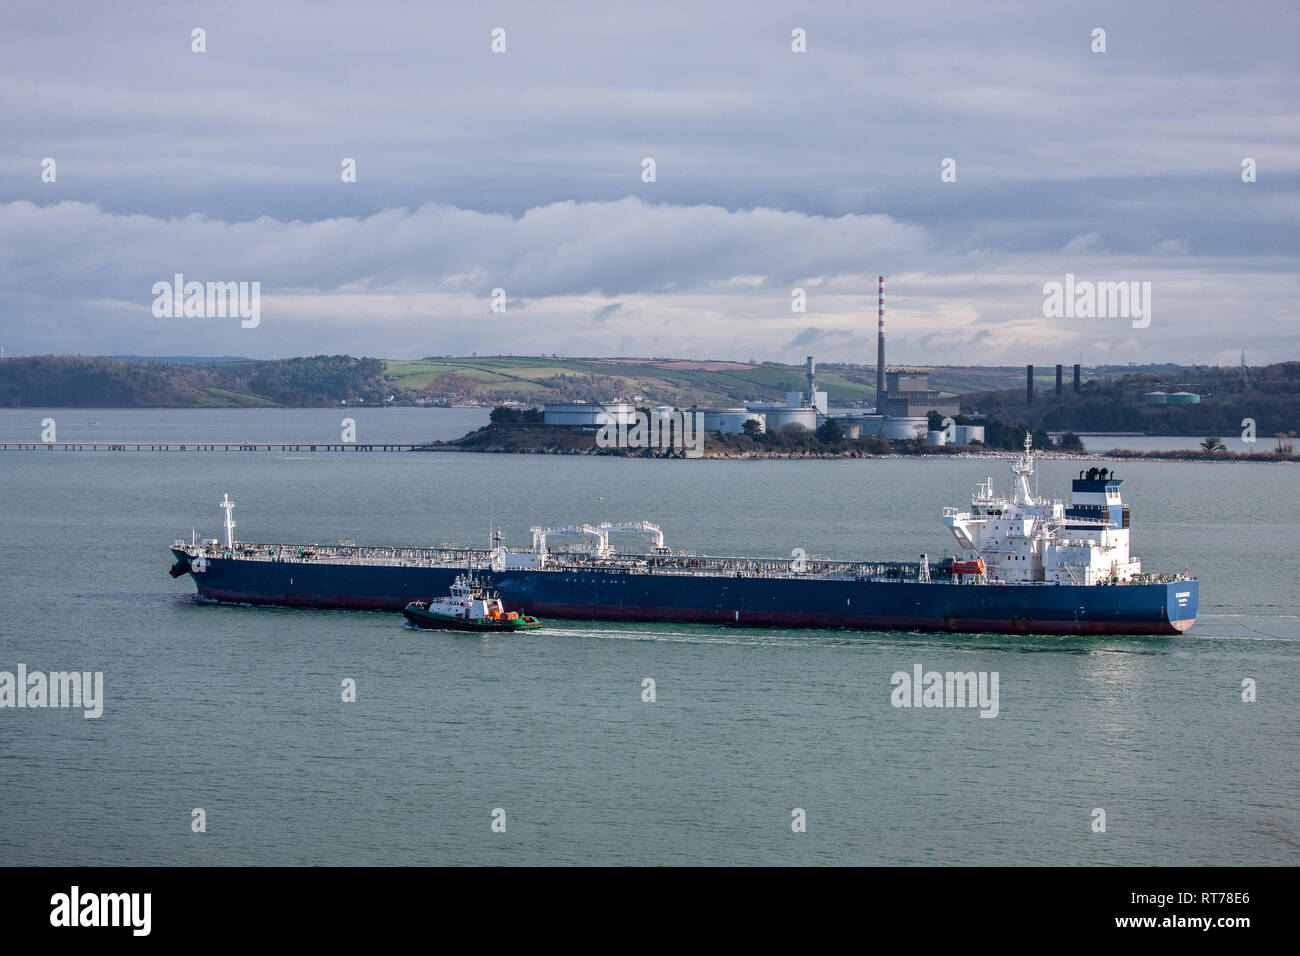 Whitegate, Cork, Ireland. 28th Feb, 2019. Port of Cork tug Alex assist the 250 meter oil tanker Searanger as she makes her way to a berth at the Whitegate Oil Refinery in Co. Cork, Ireland. Credit: David Creedon/Alamy Live News Stock Photo